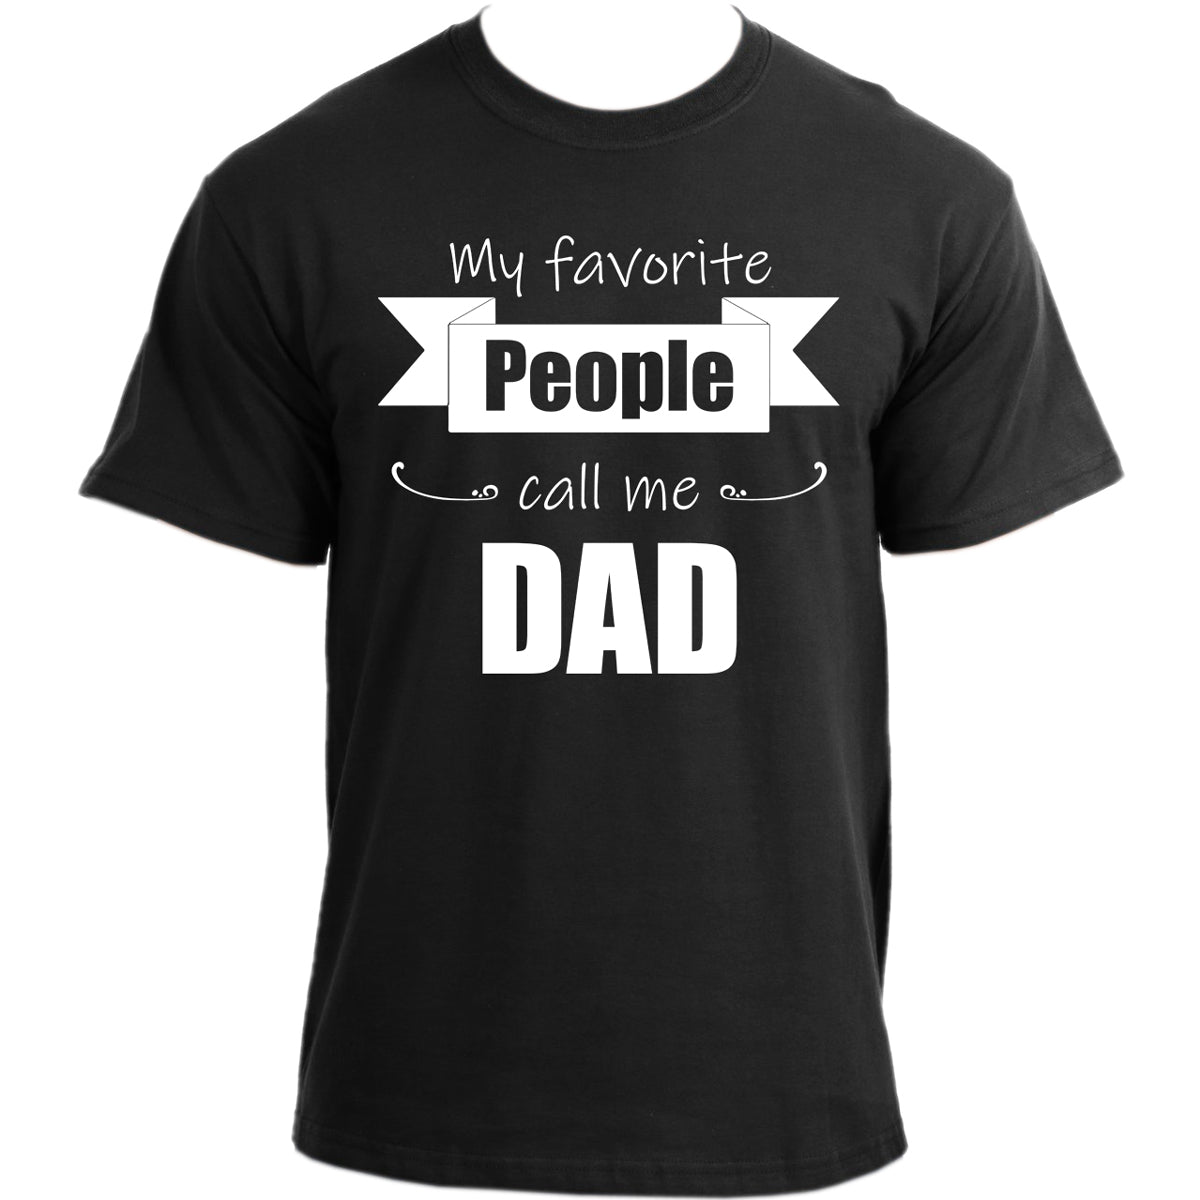 My favourite people call me DAD T-Shirt | Funny dad short sleeve T shirt for men